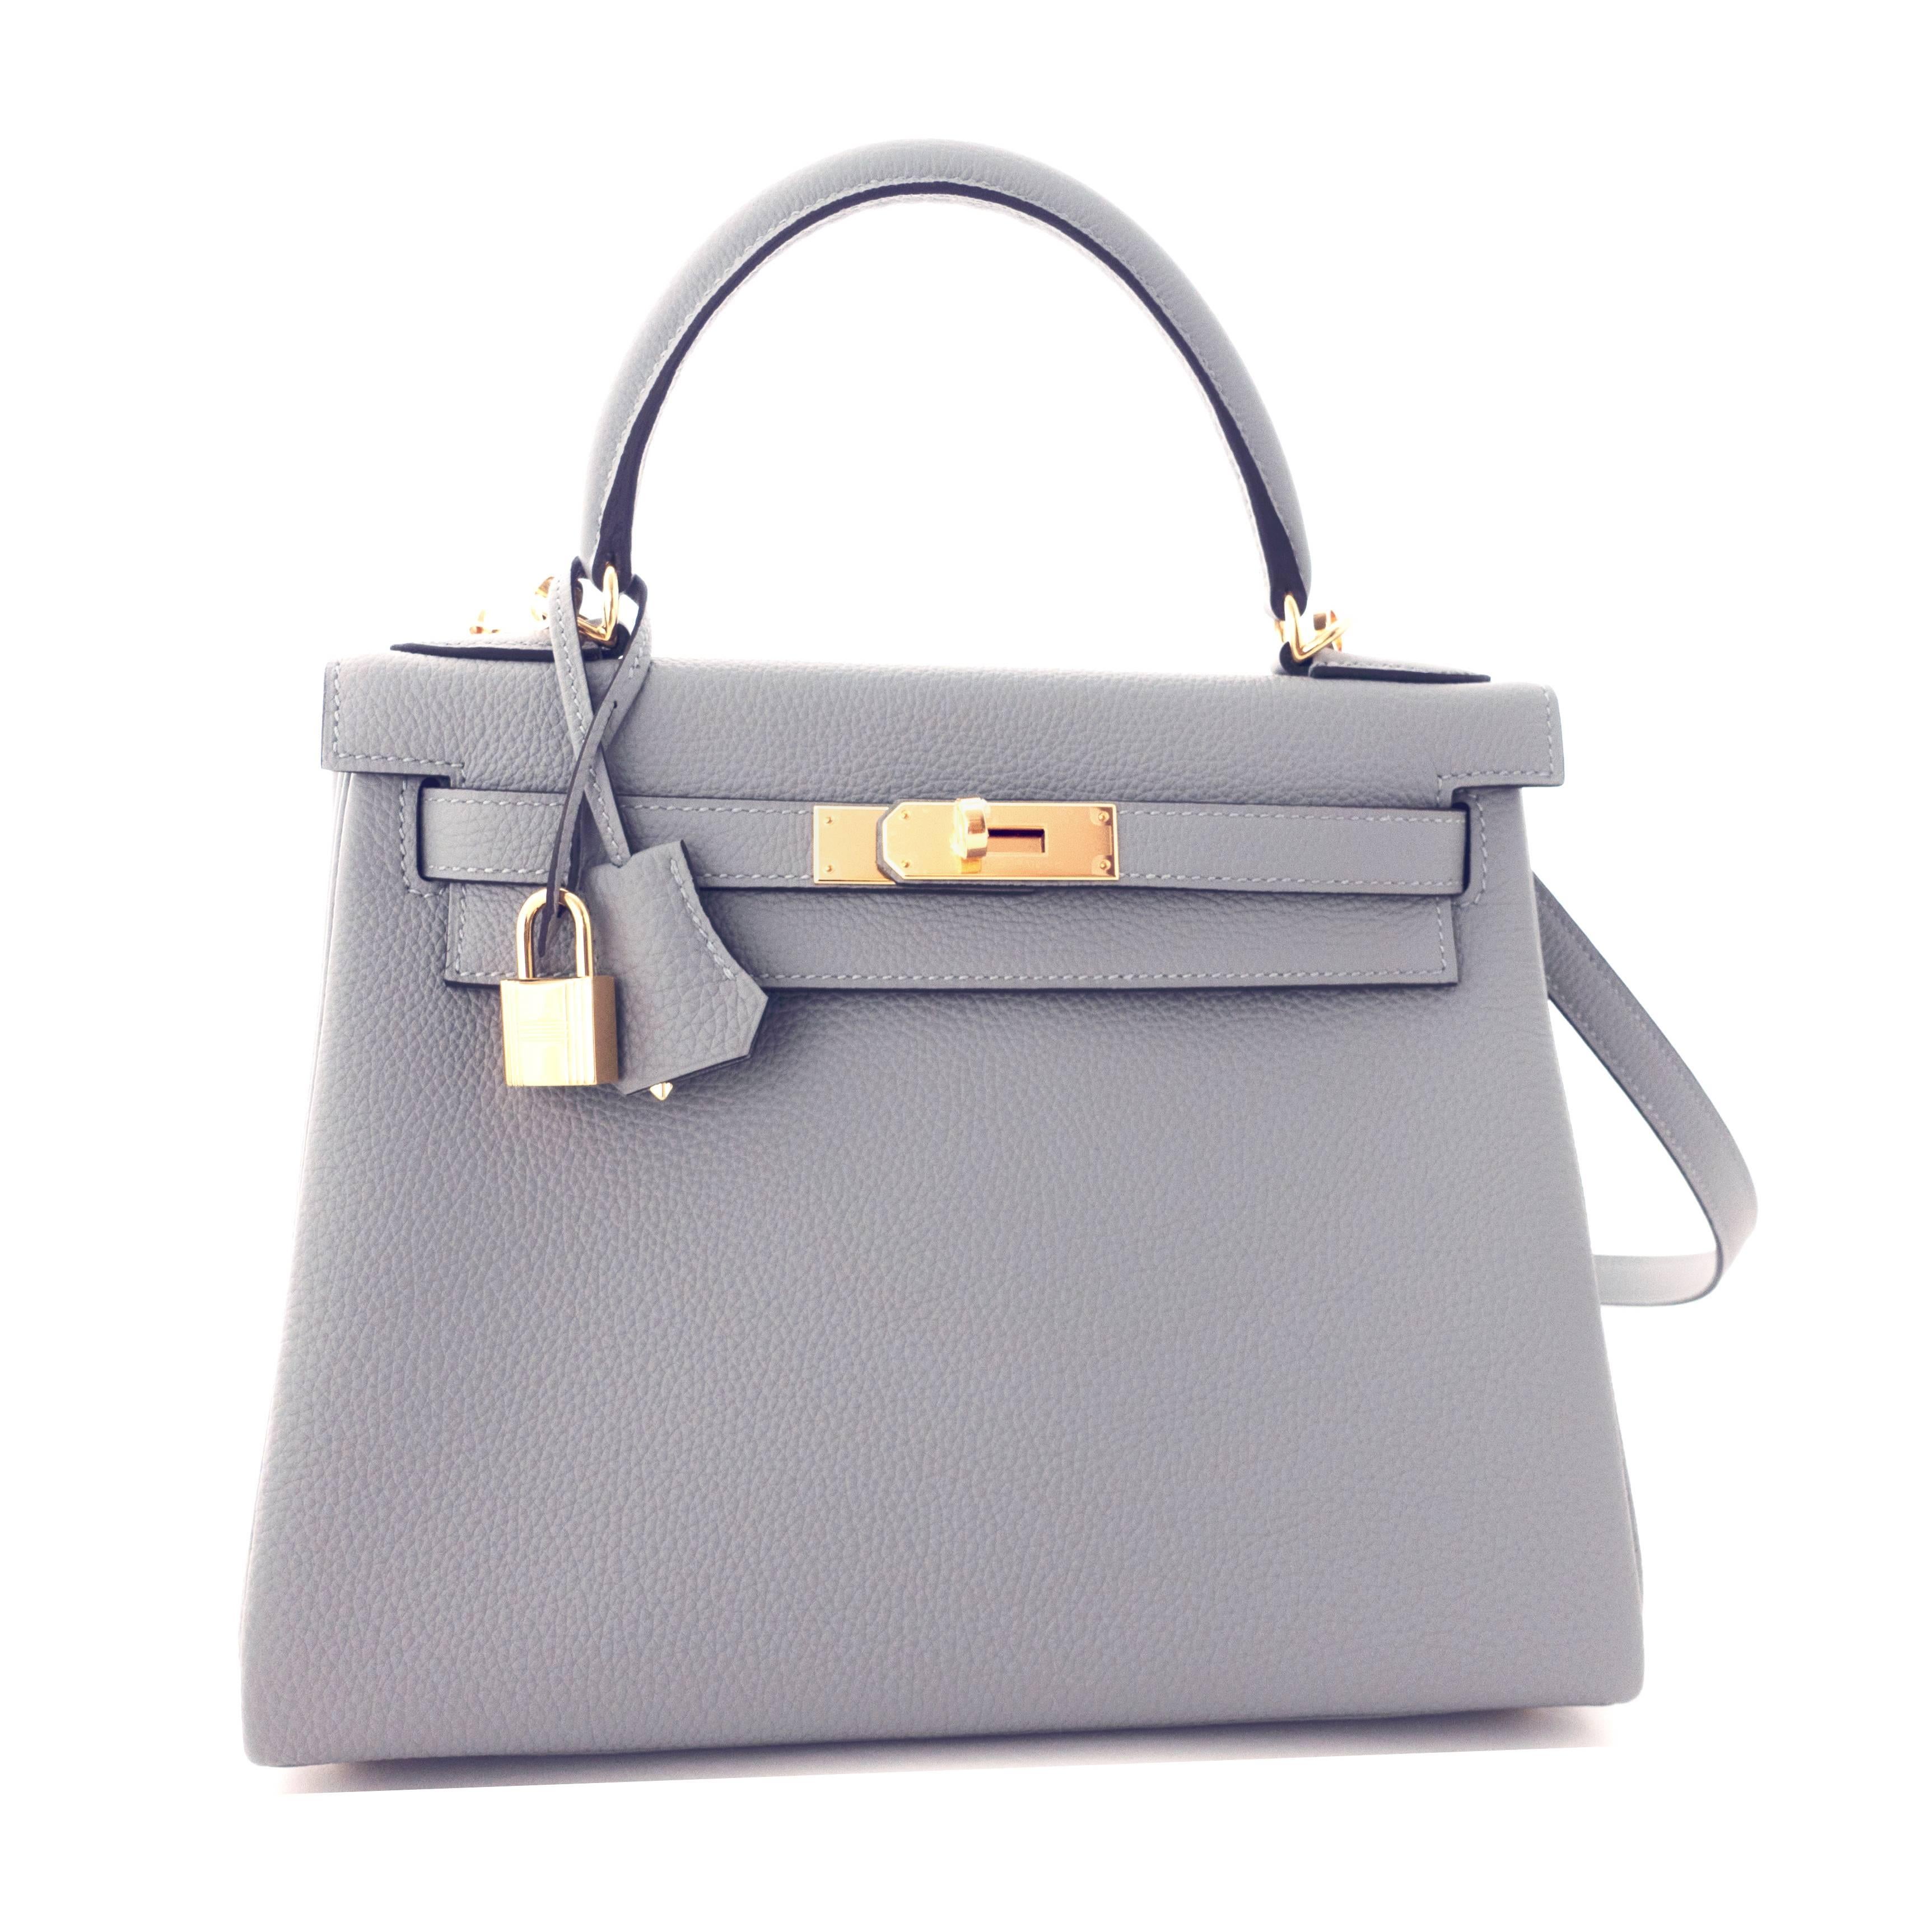 Hermes Gris Mouette New Grey 28cm Togo Kelly Bag Gold Hardware Superb
Brand New in Box.  Store fresh. Pristine condition (with plastic on hardware). 
Just purchased from Hermes store in 2016 with new interior X Stamp. 
Perfect gift! Comes with